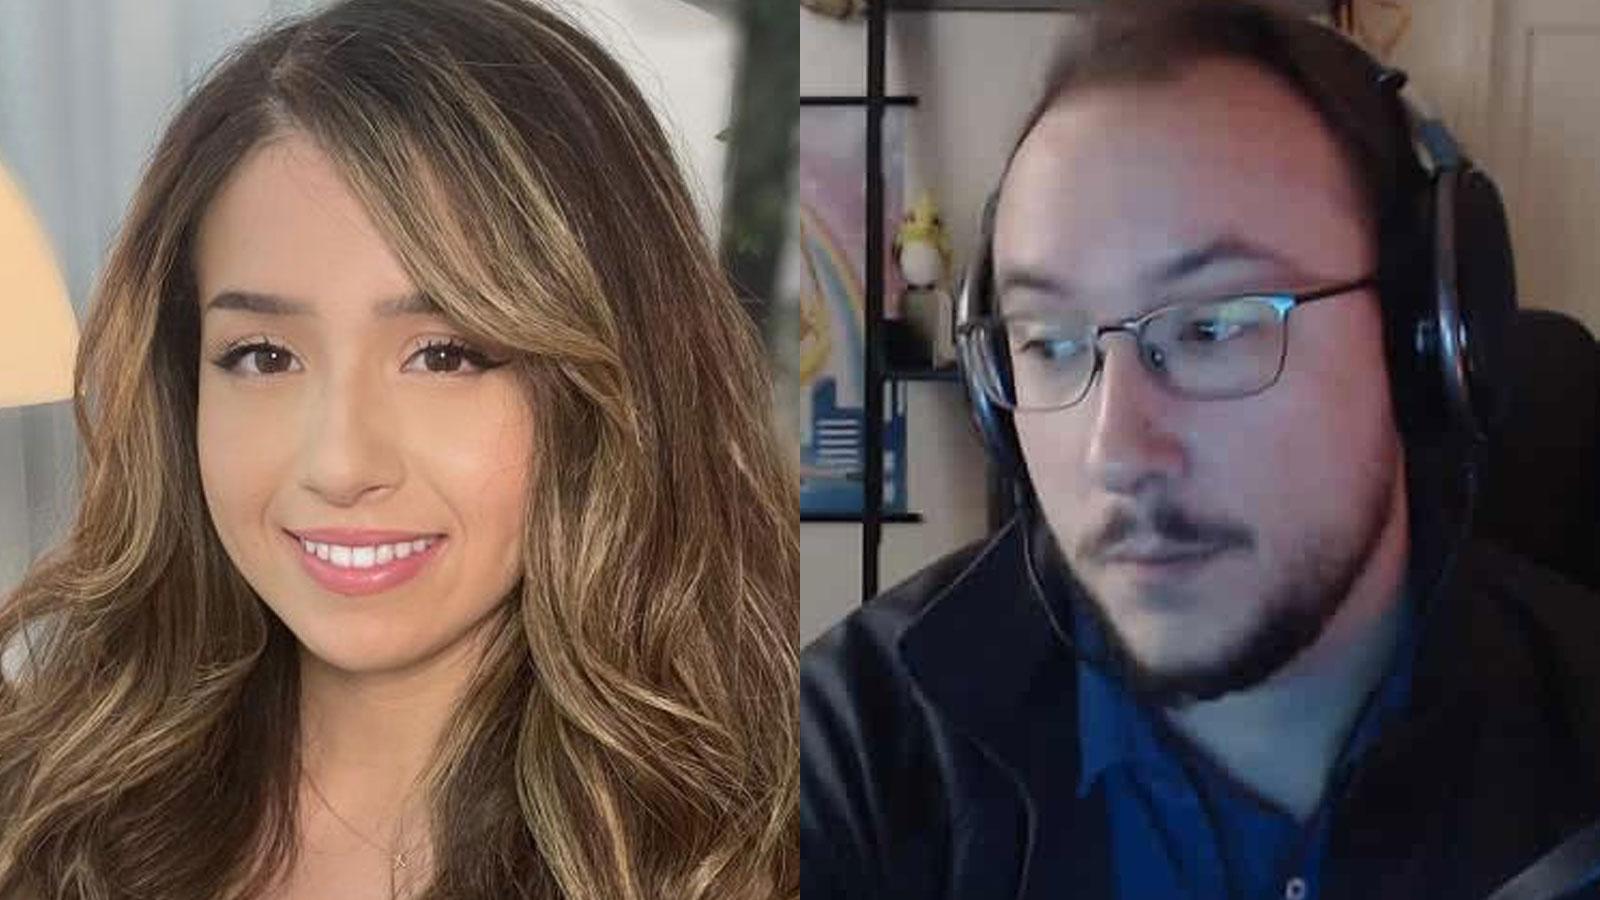 Twitch streamers Pokimane and MoonMoon